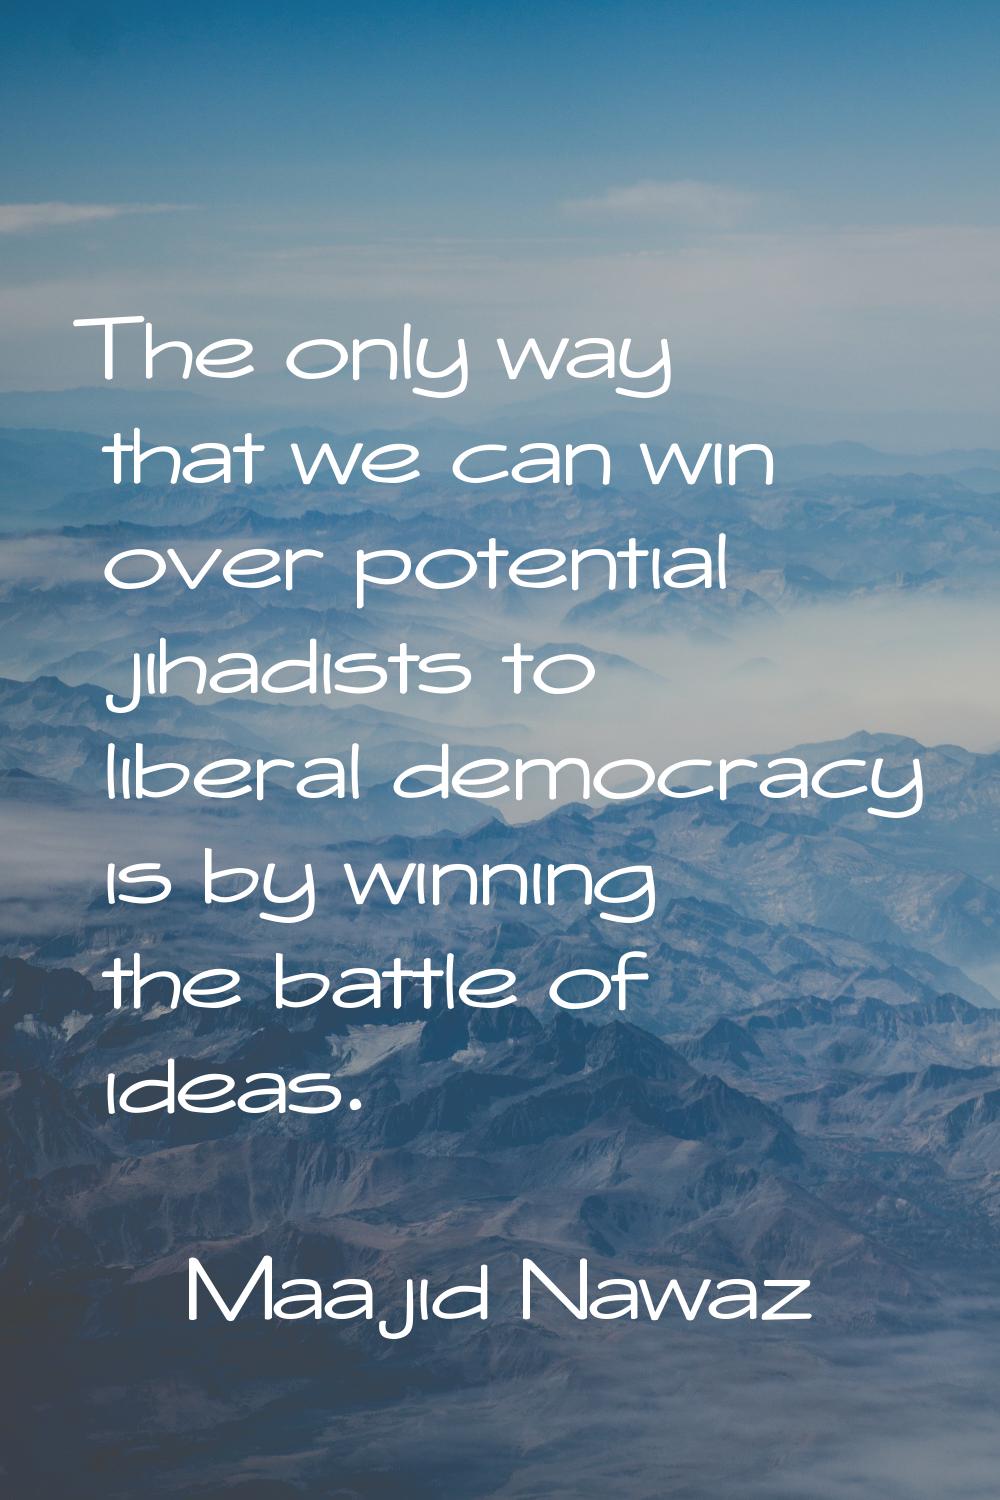 The only way that we can win over potential jihadists to liberal democracy is by winning the battle